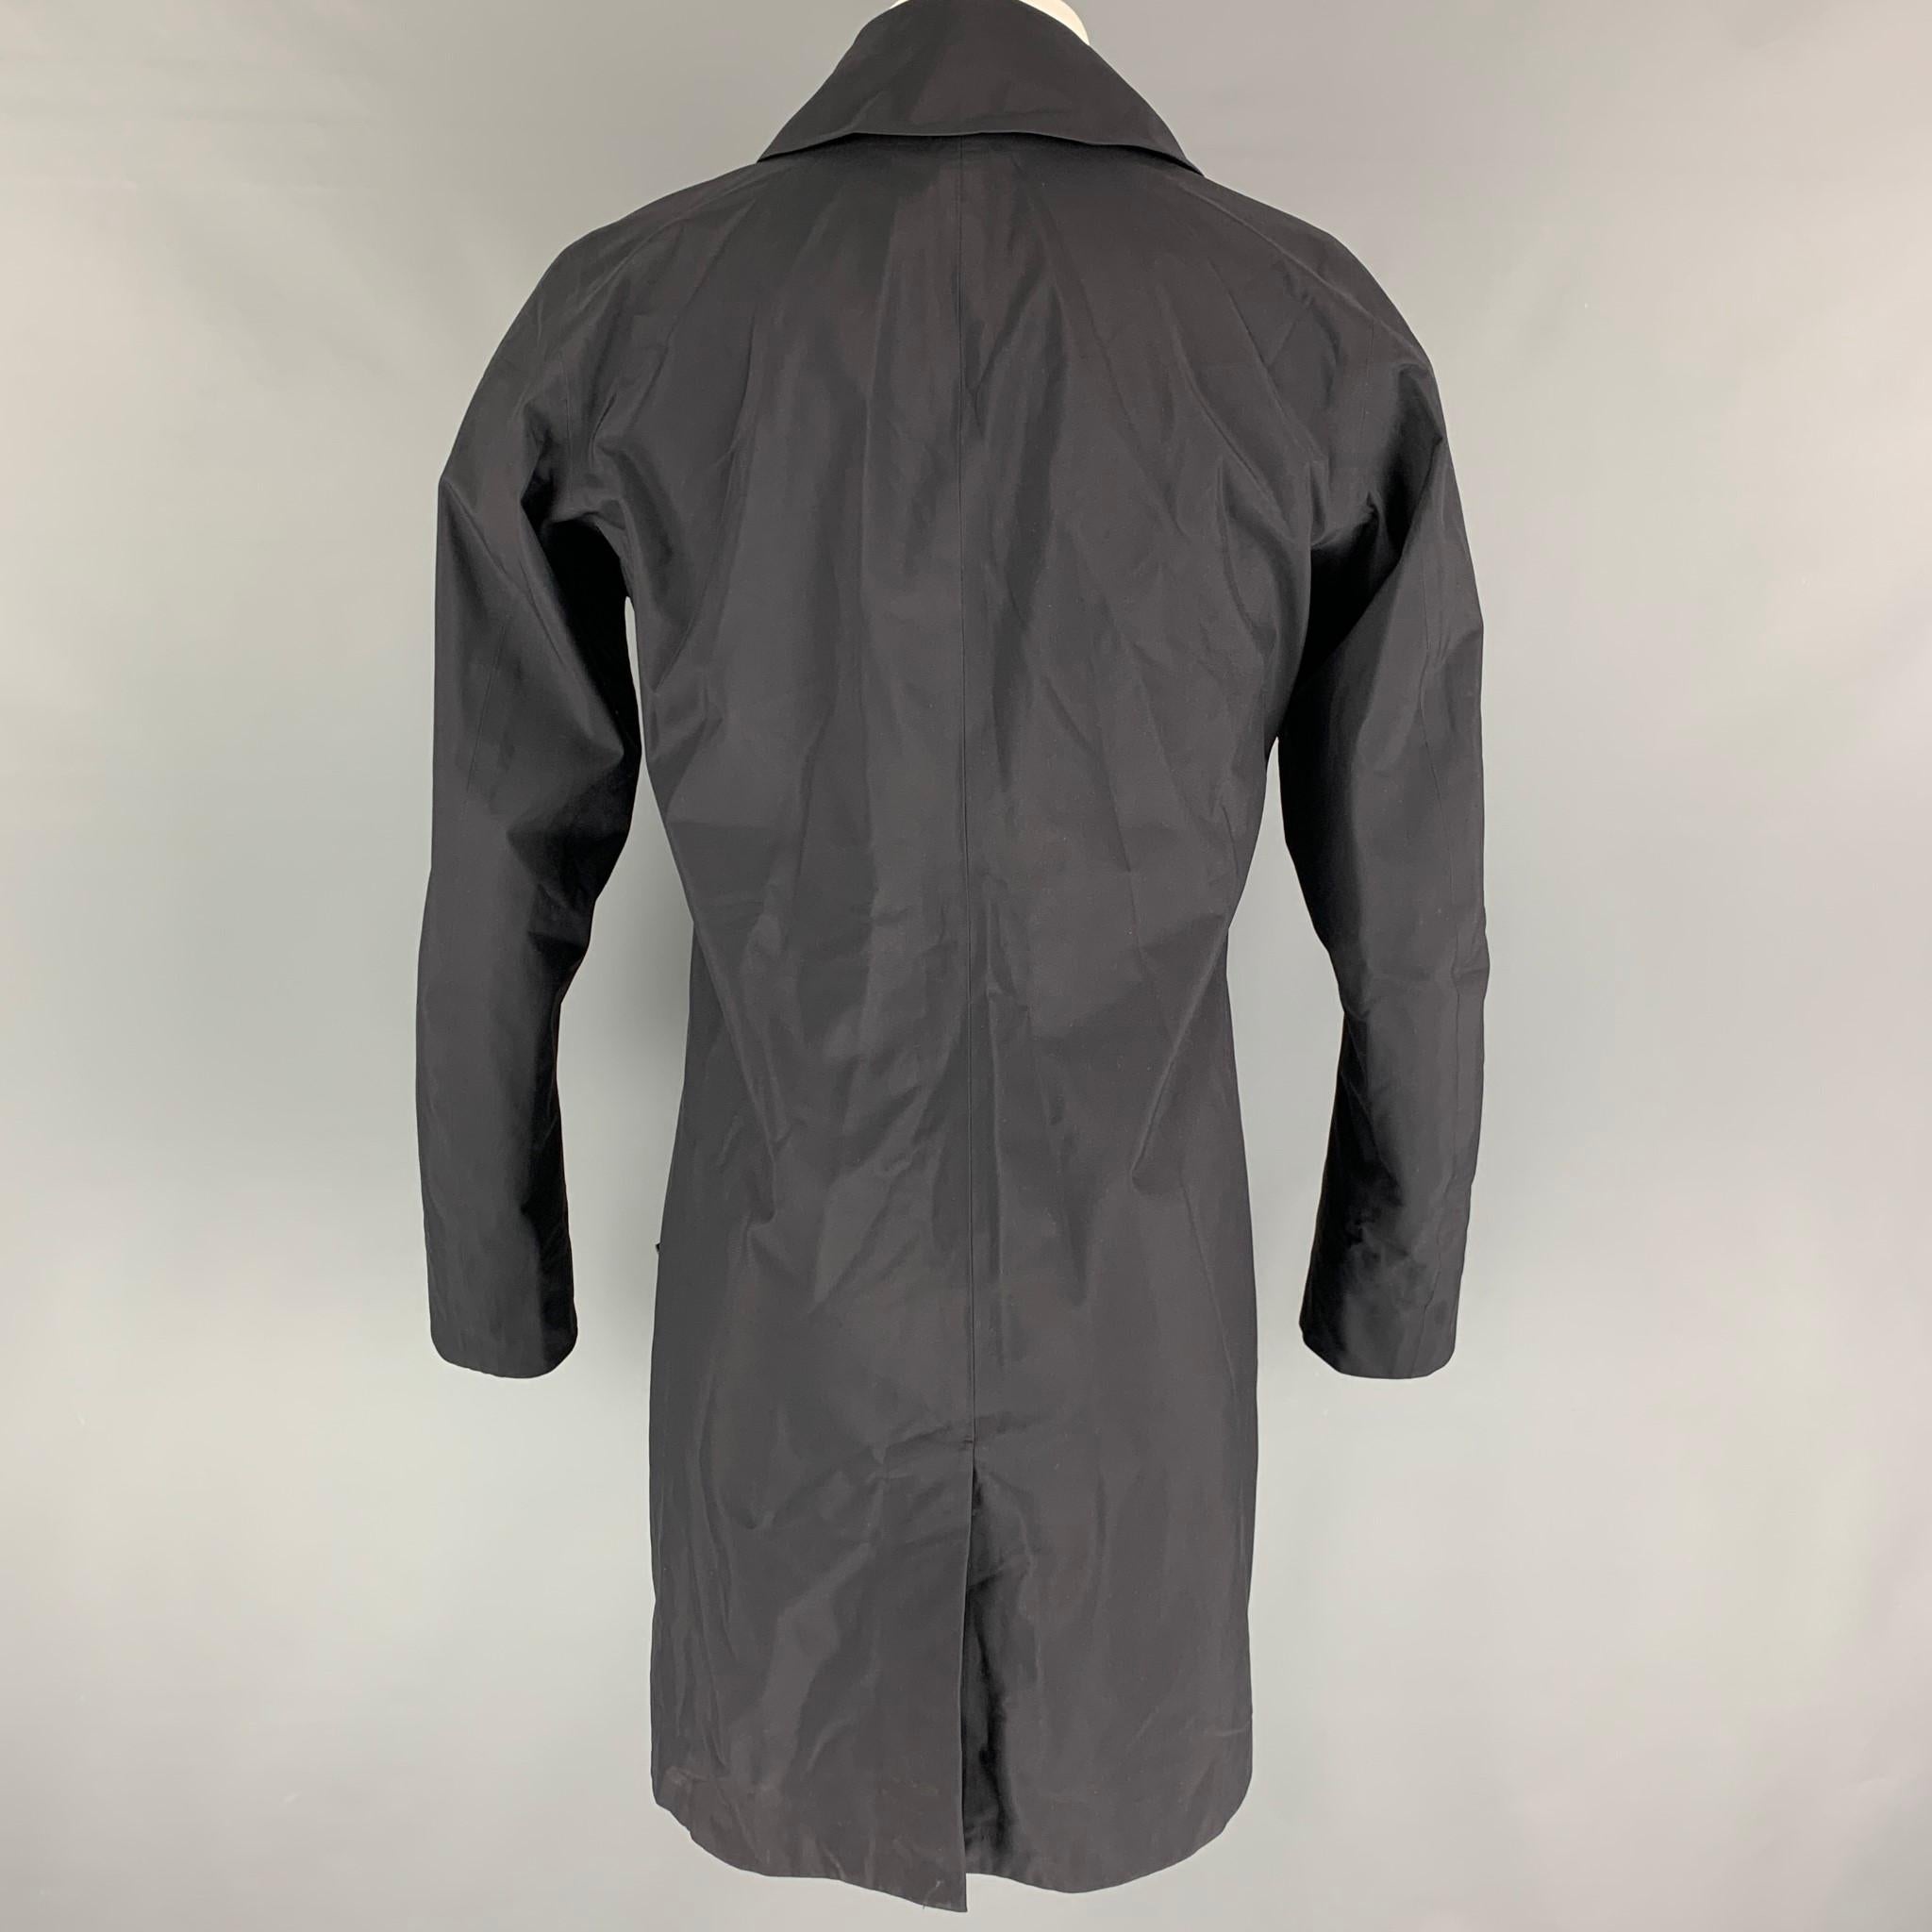 ARCTERYX 'VEILANCE' coat comes in a black nylon featuring a shawl collar, slit pockets, and a hidden snap button closure. 

Very Good Pre-Owned Condition.
Marked: S

Measurements:

Shoulder: 17.5 in.
Chest: 38 in.
Sleeve: 26.5 in.
Length: 37 in. 